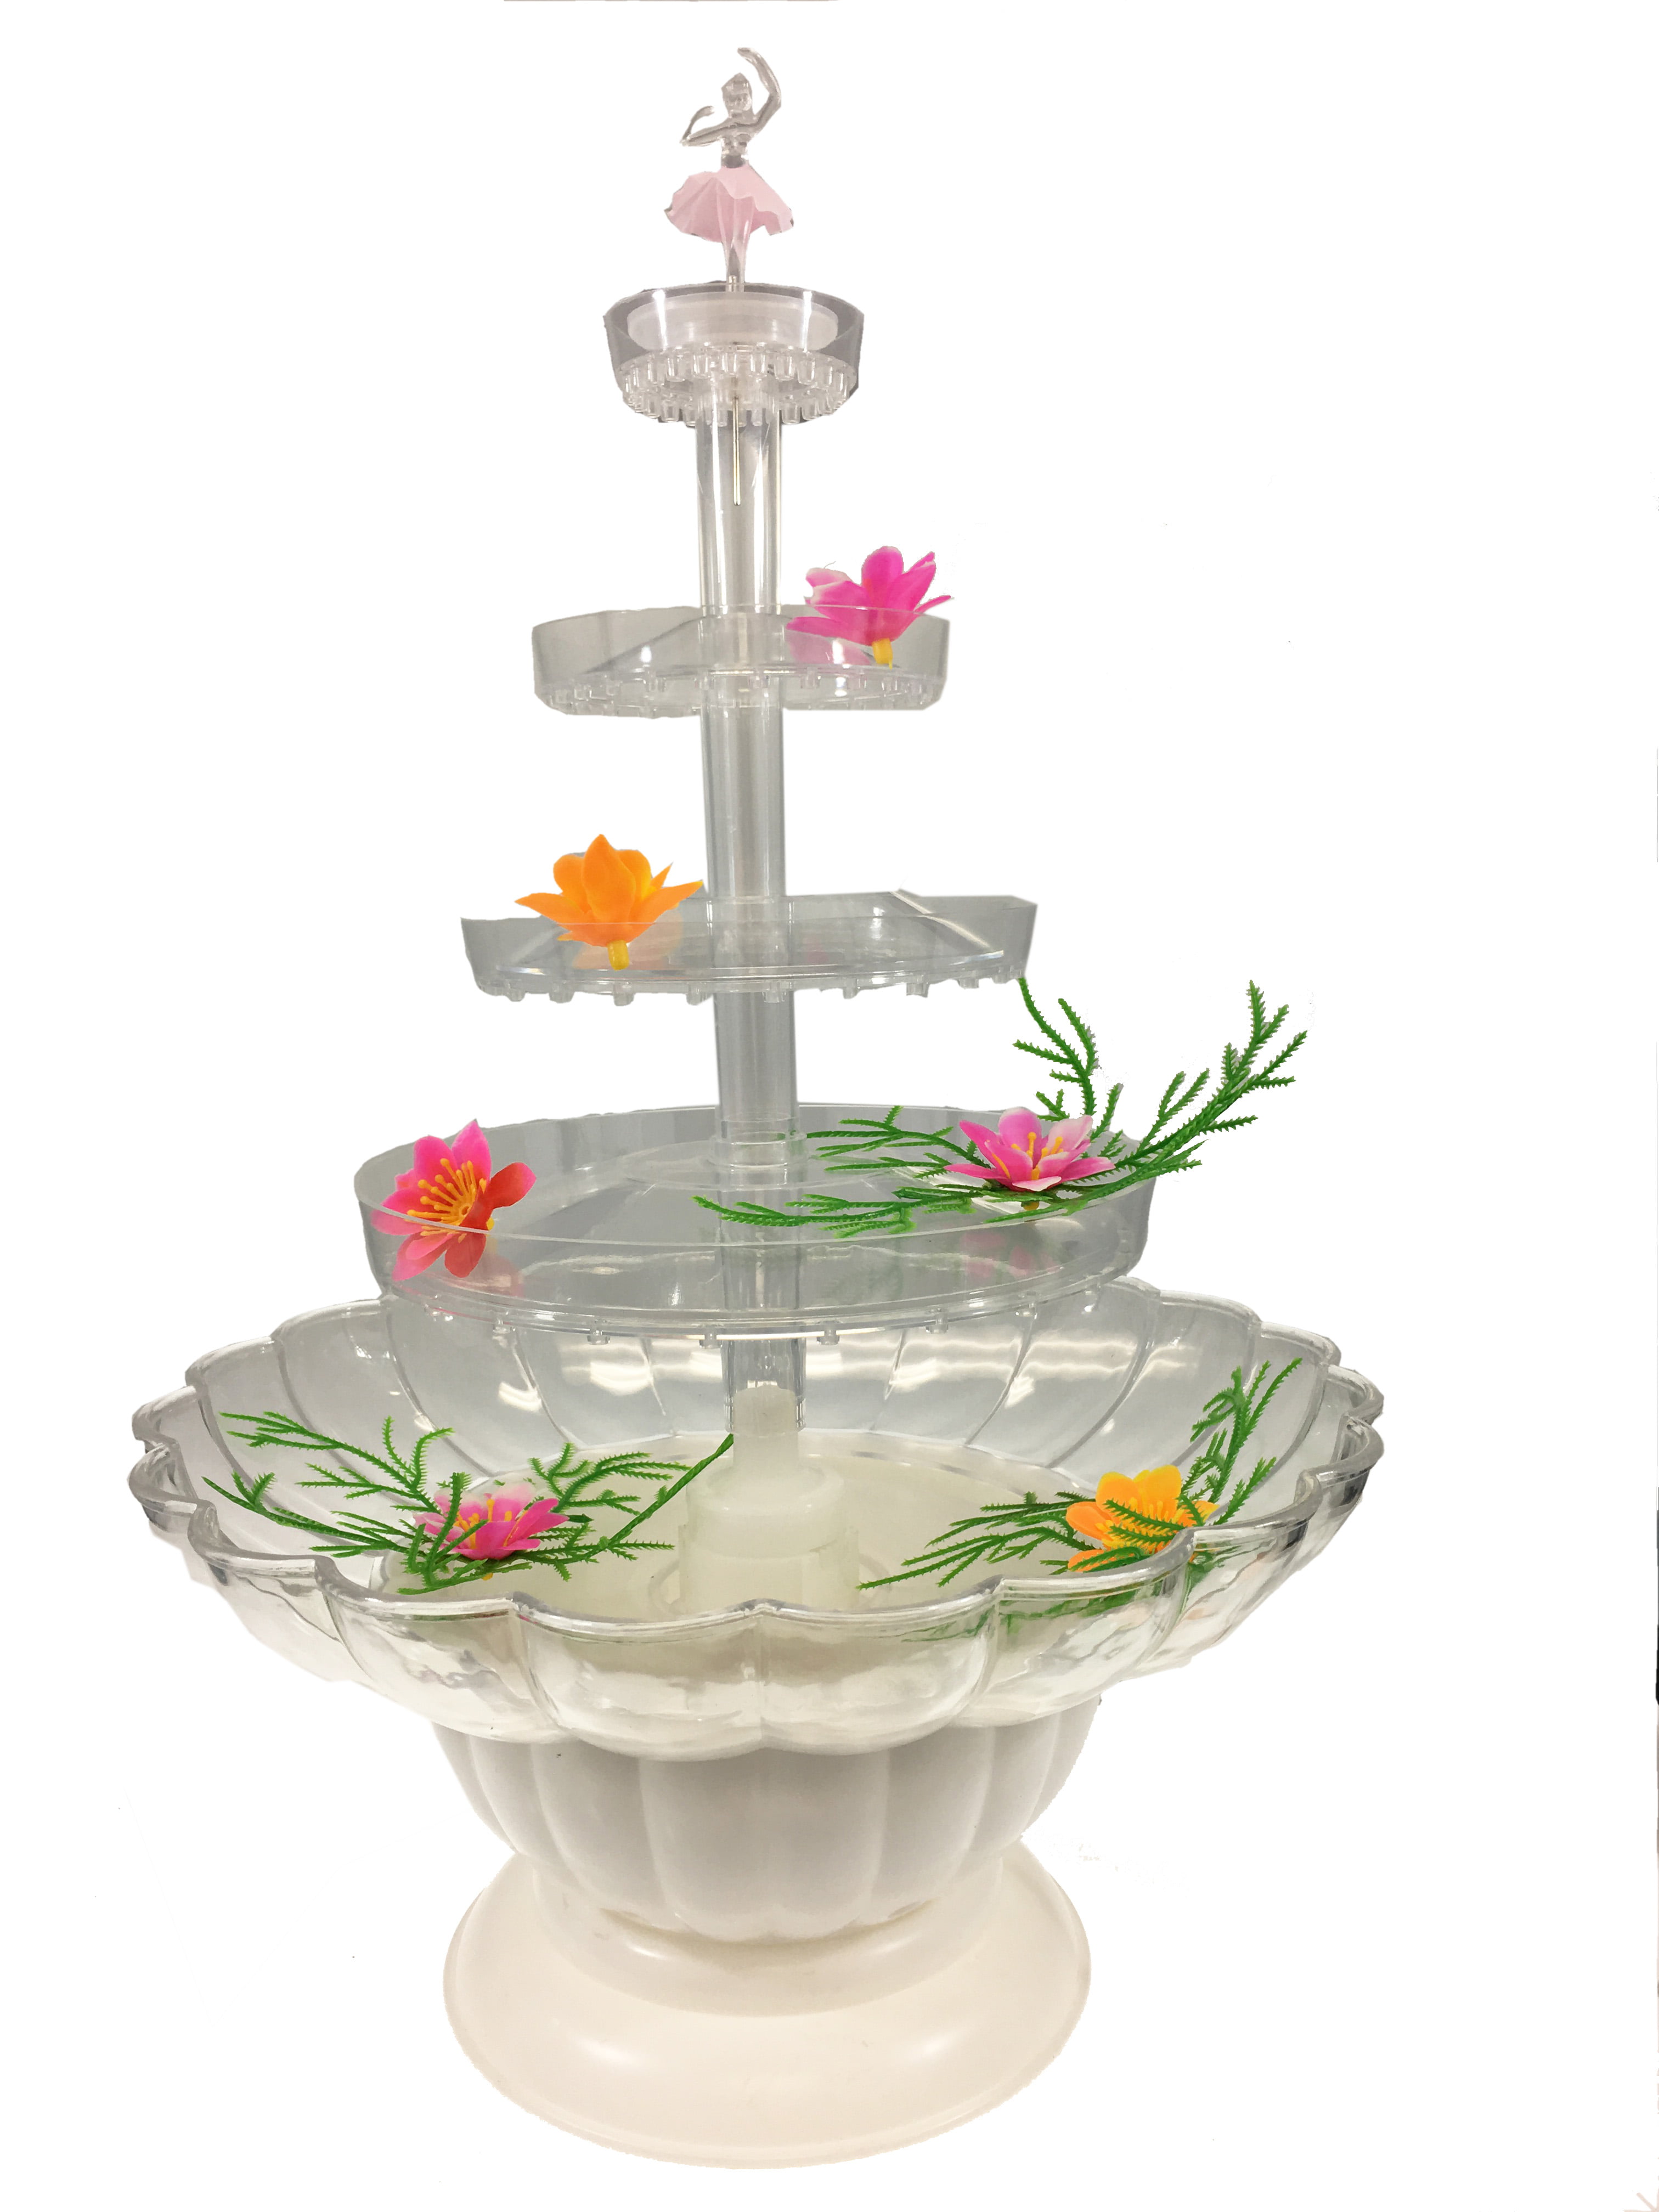 Lighted Plastic Water Fountain For Weddings Home Office Garden or Cake Centerpiece 13 inch LA Crafts